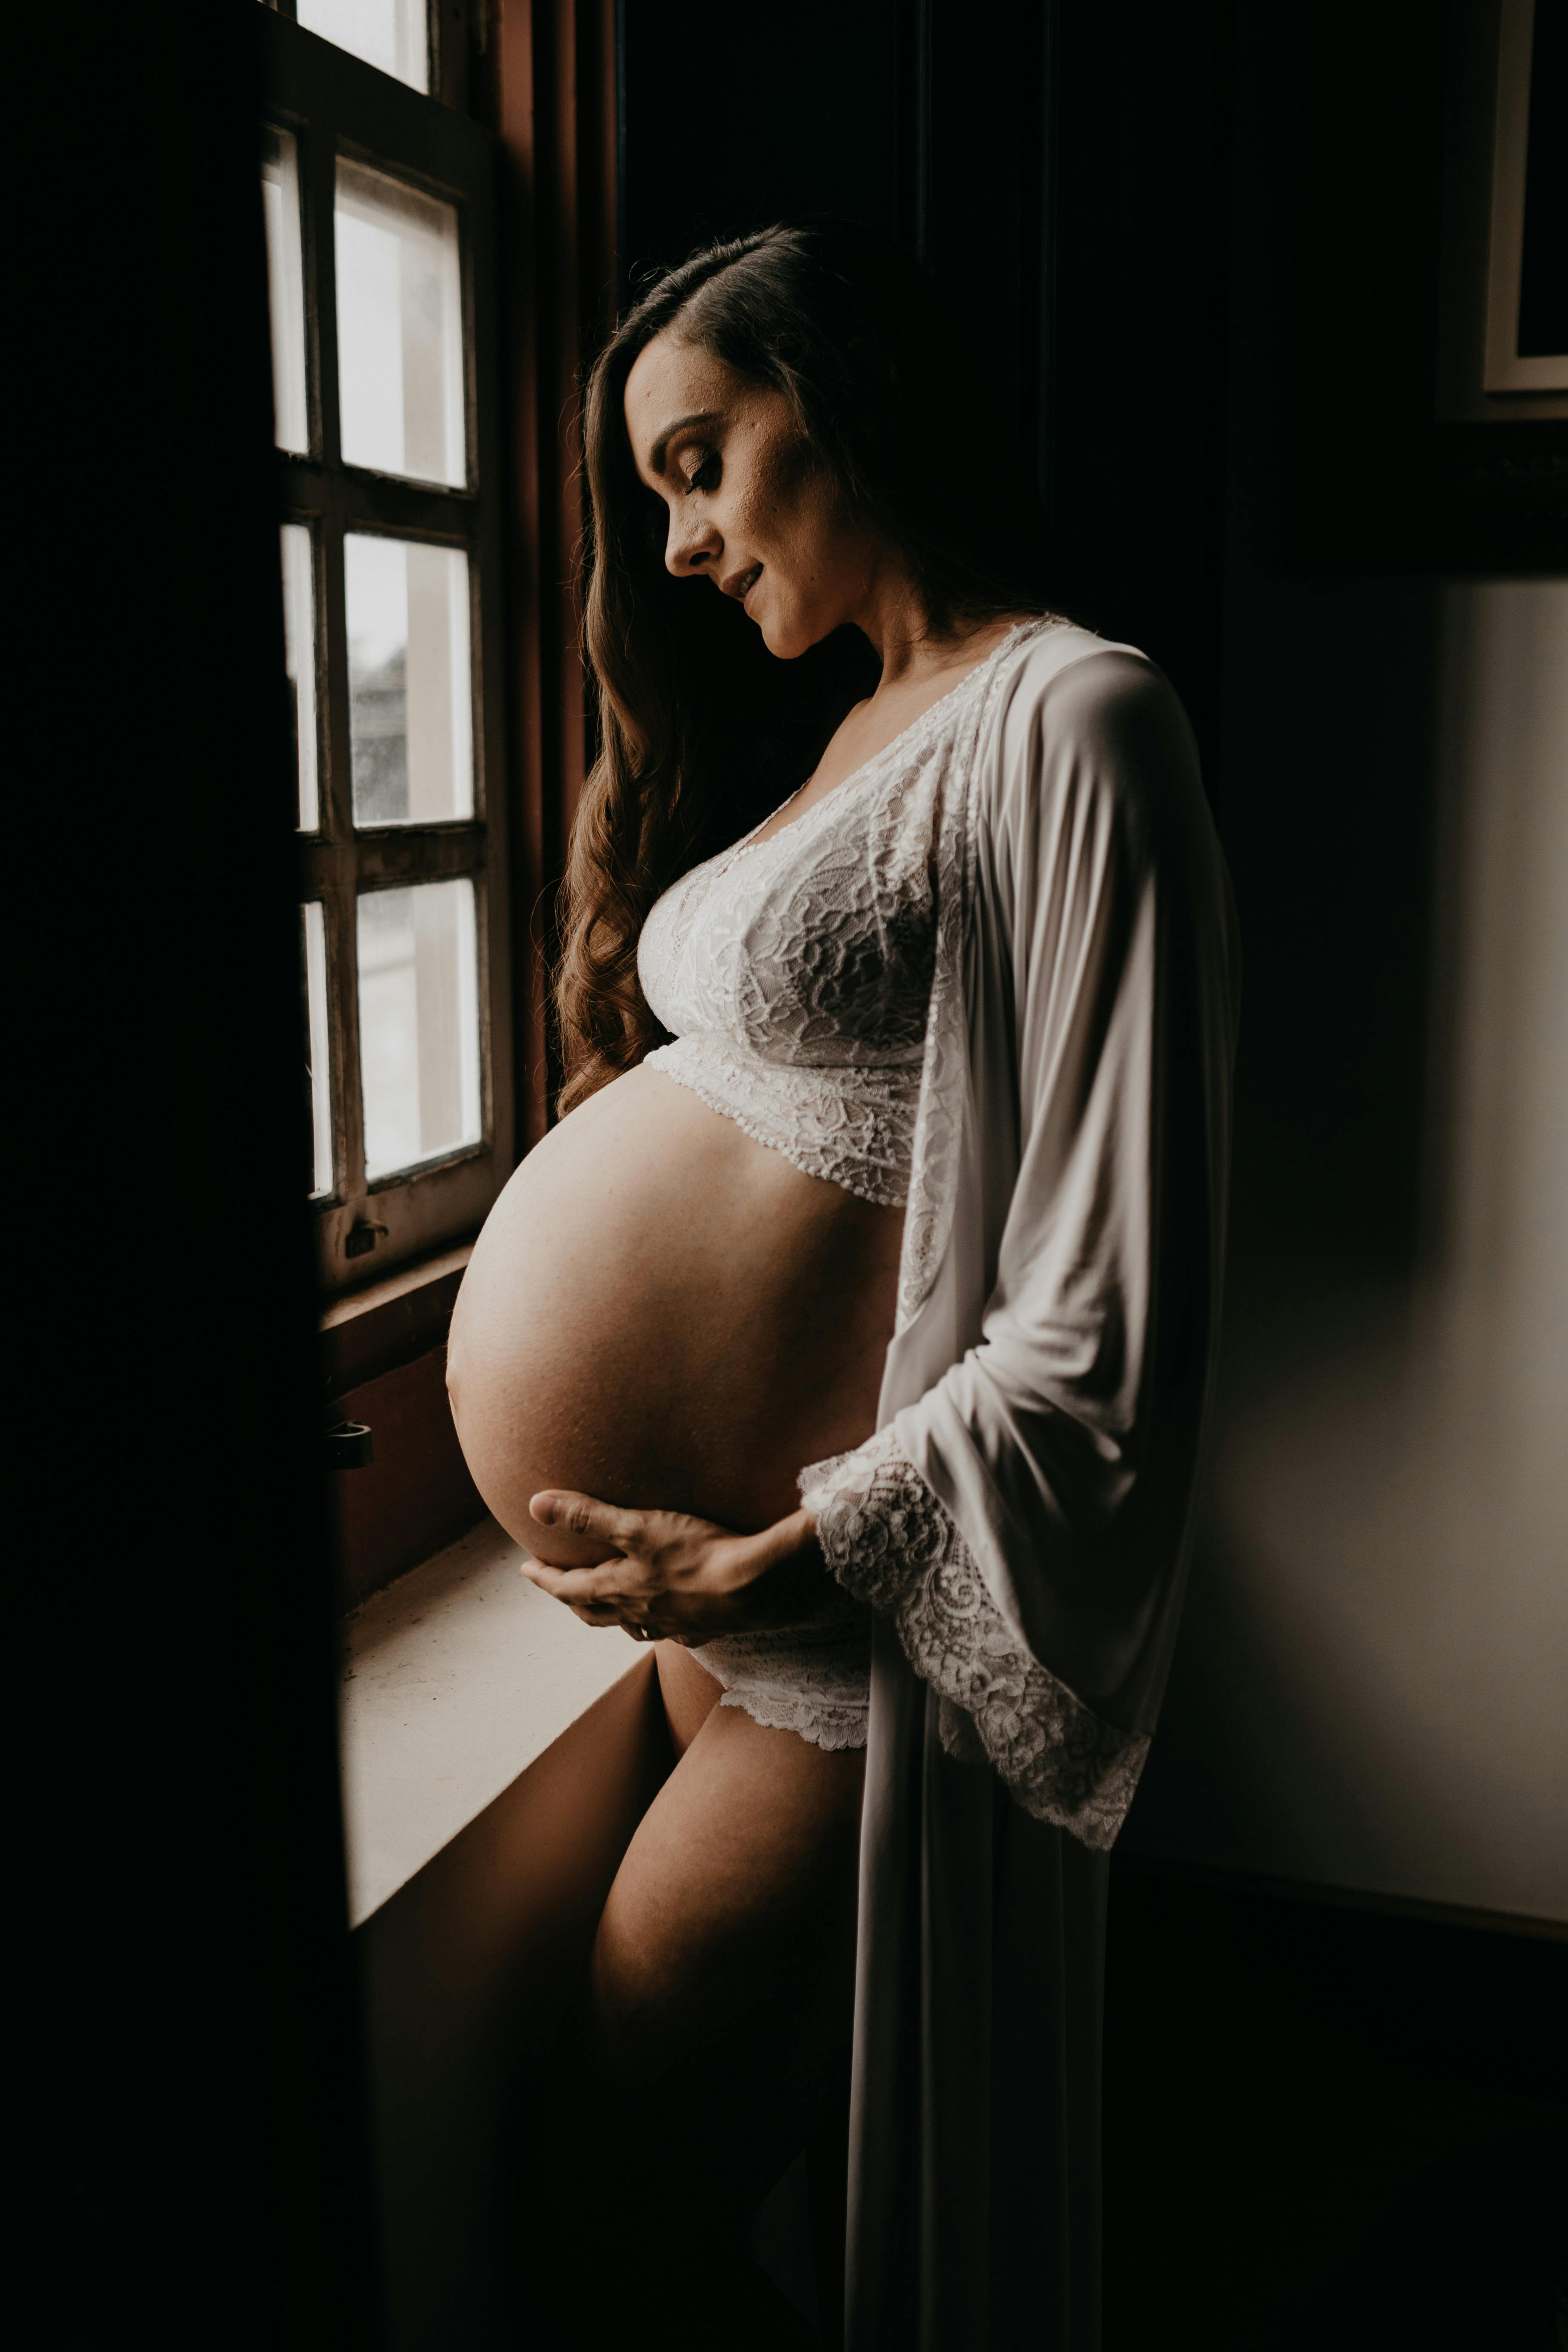 4 Things To Wear To a Maternity Photo Shoot